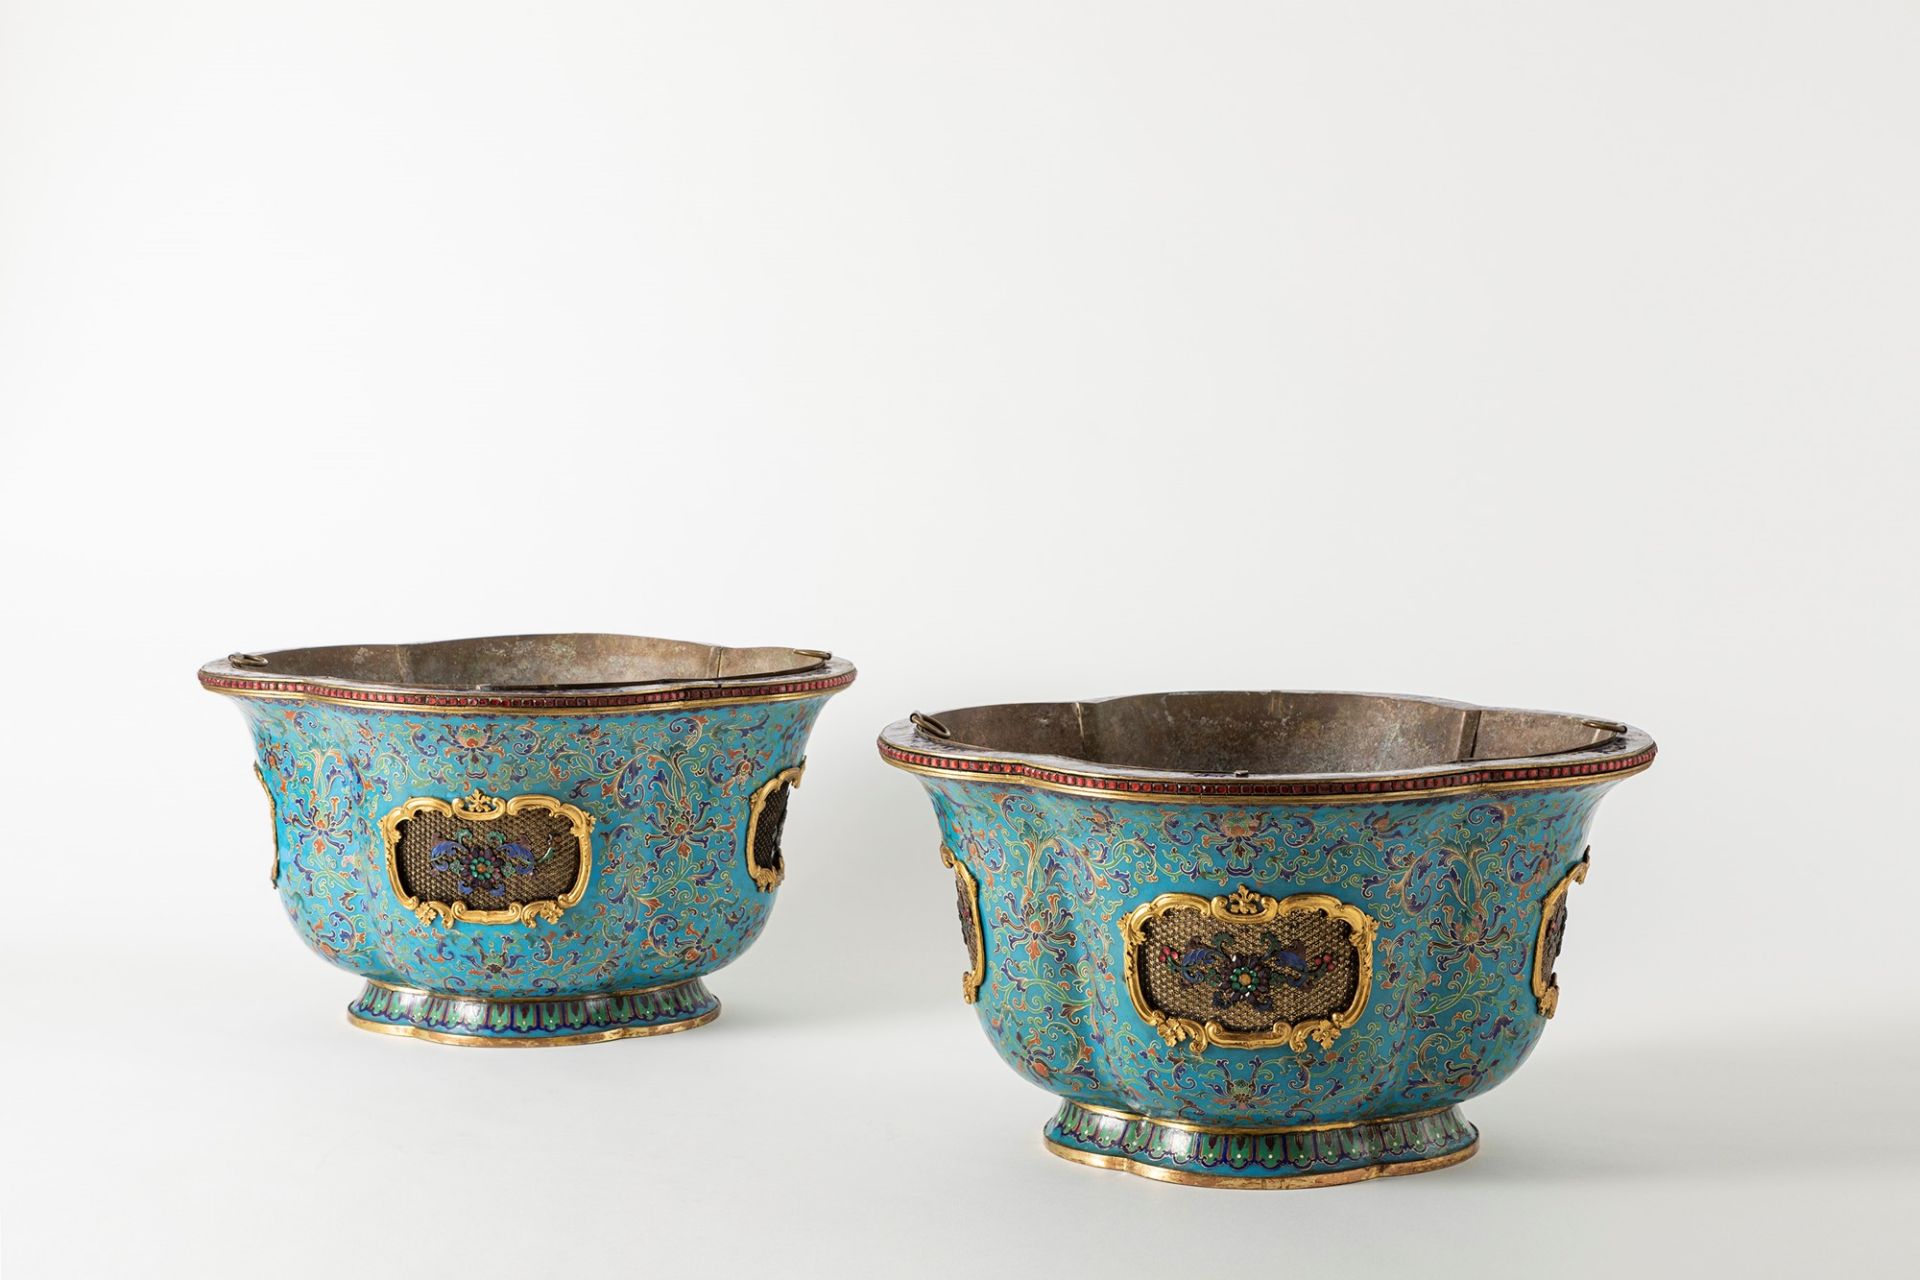 A pair of enamelled jardinieres. China, late 18th/ early 19th century